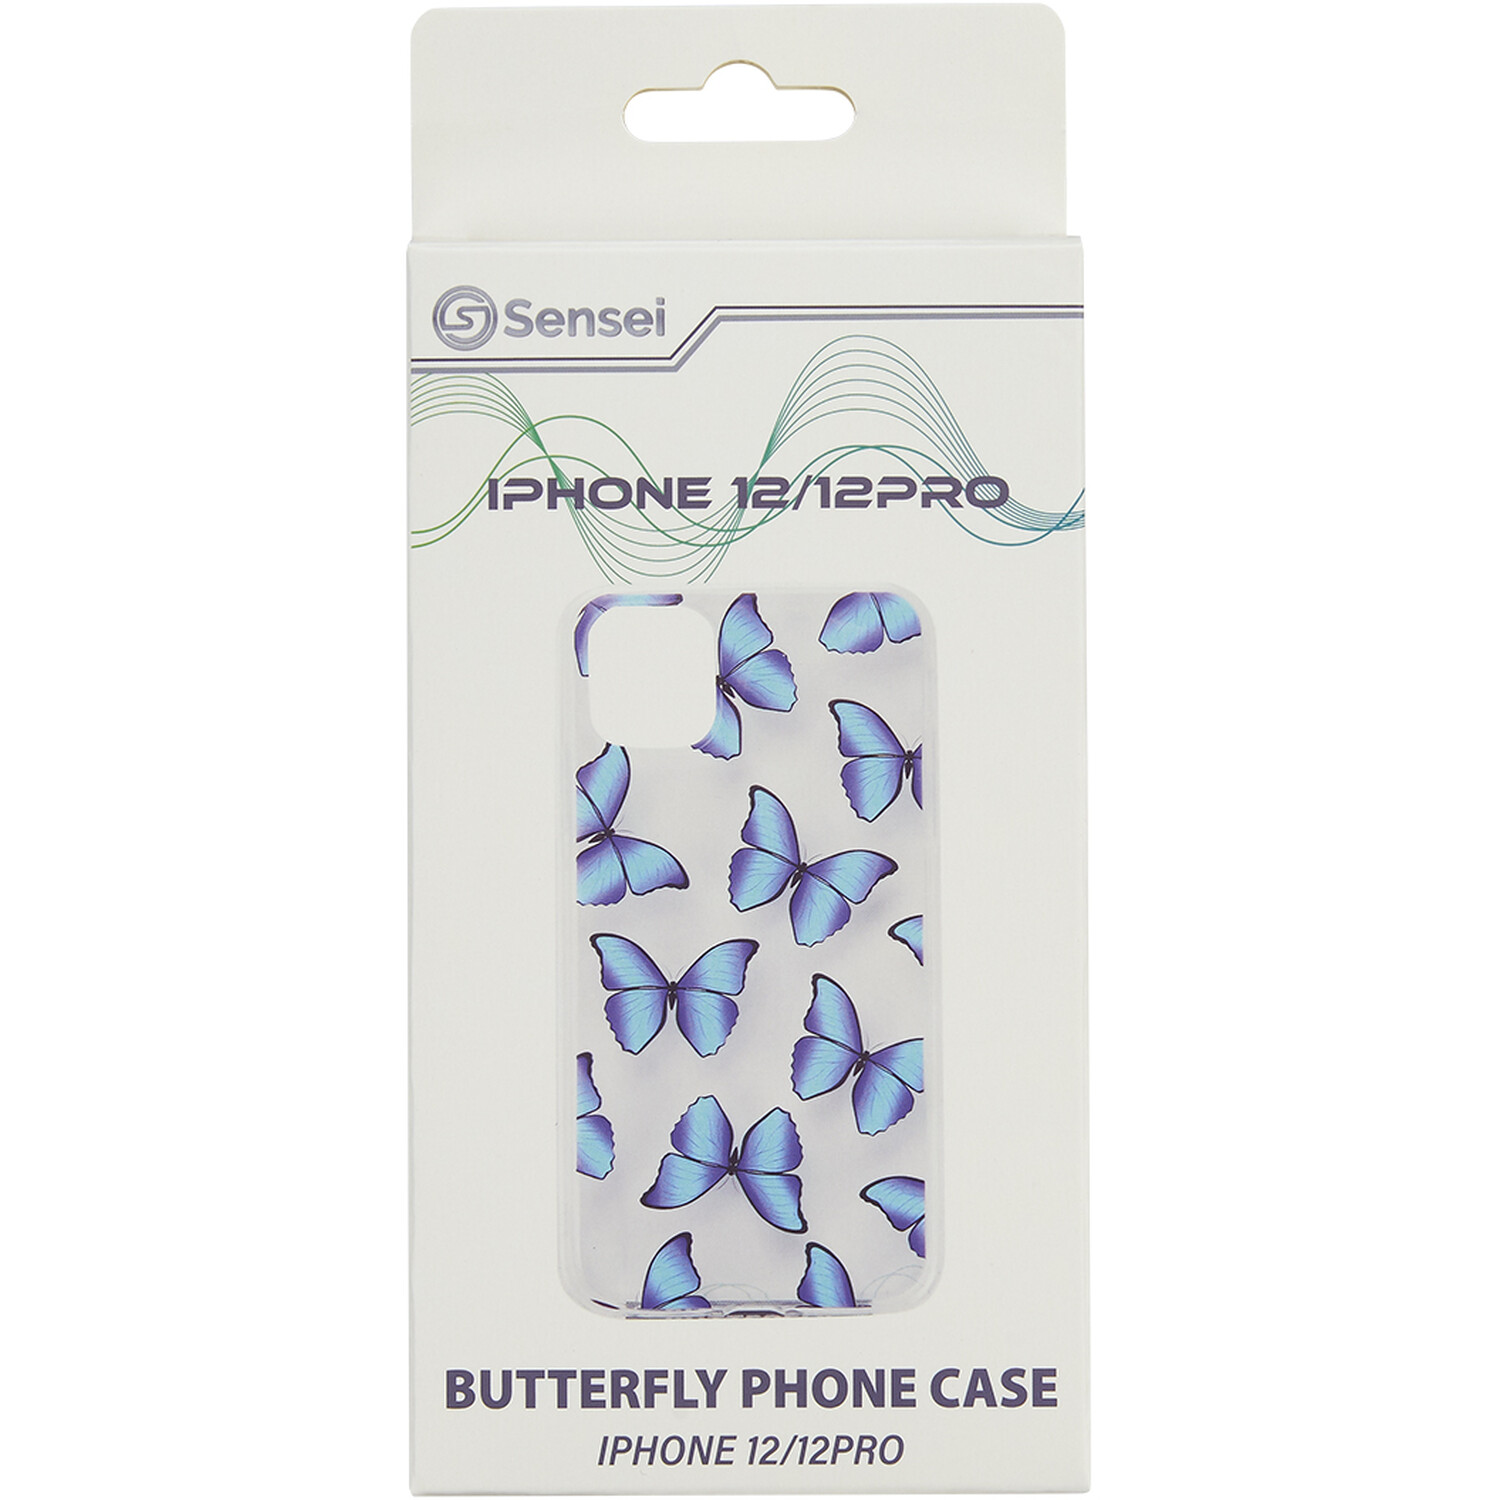 Sensei Blue Butterfly iPhone 12 and 12 Pro Phone Case Image